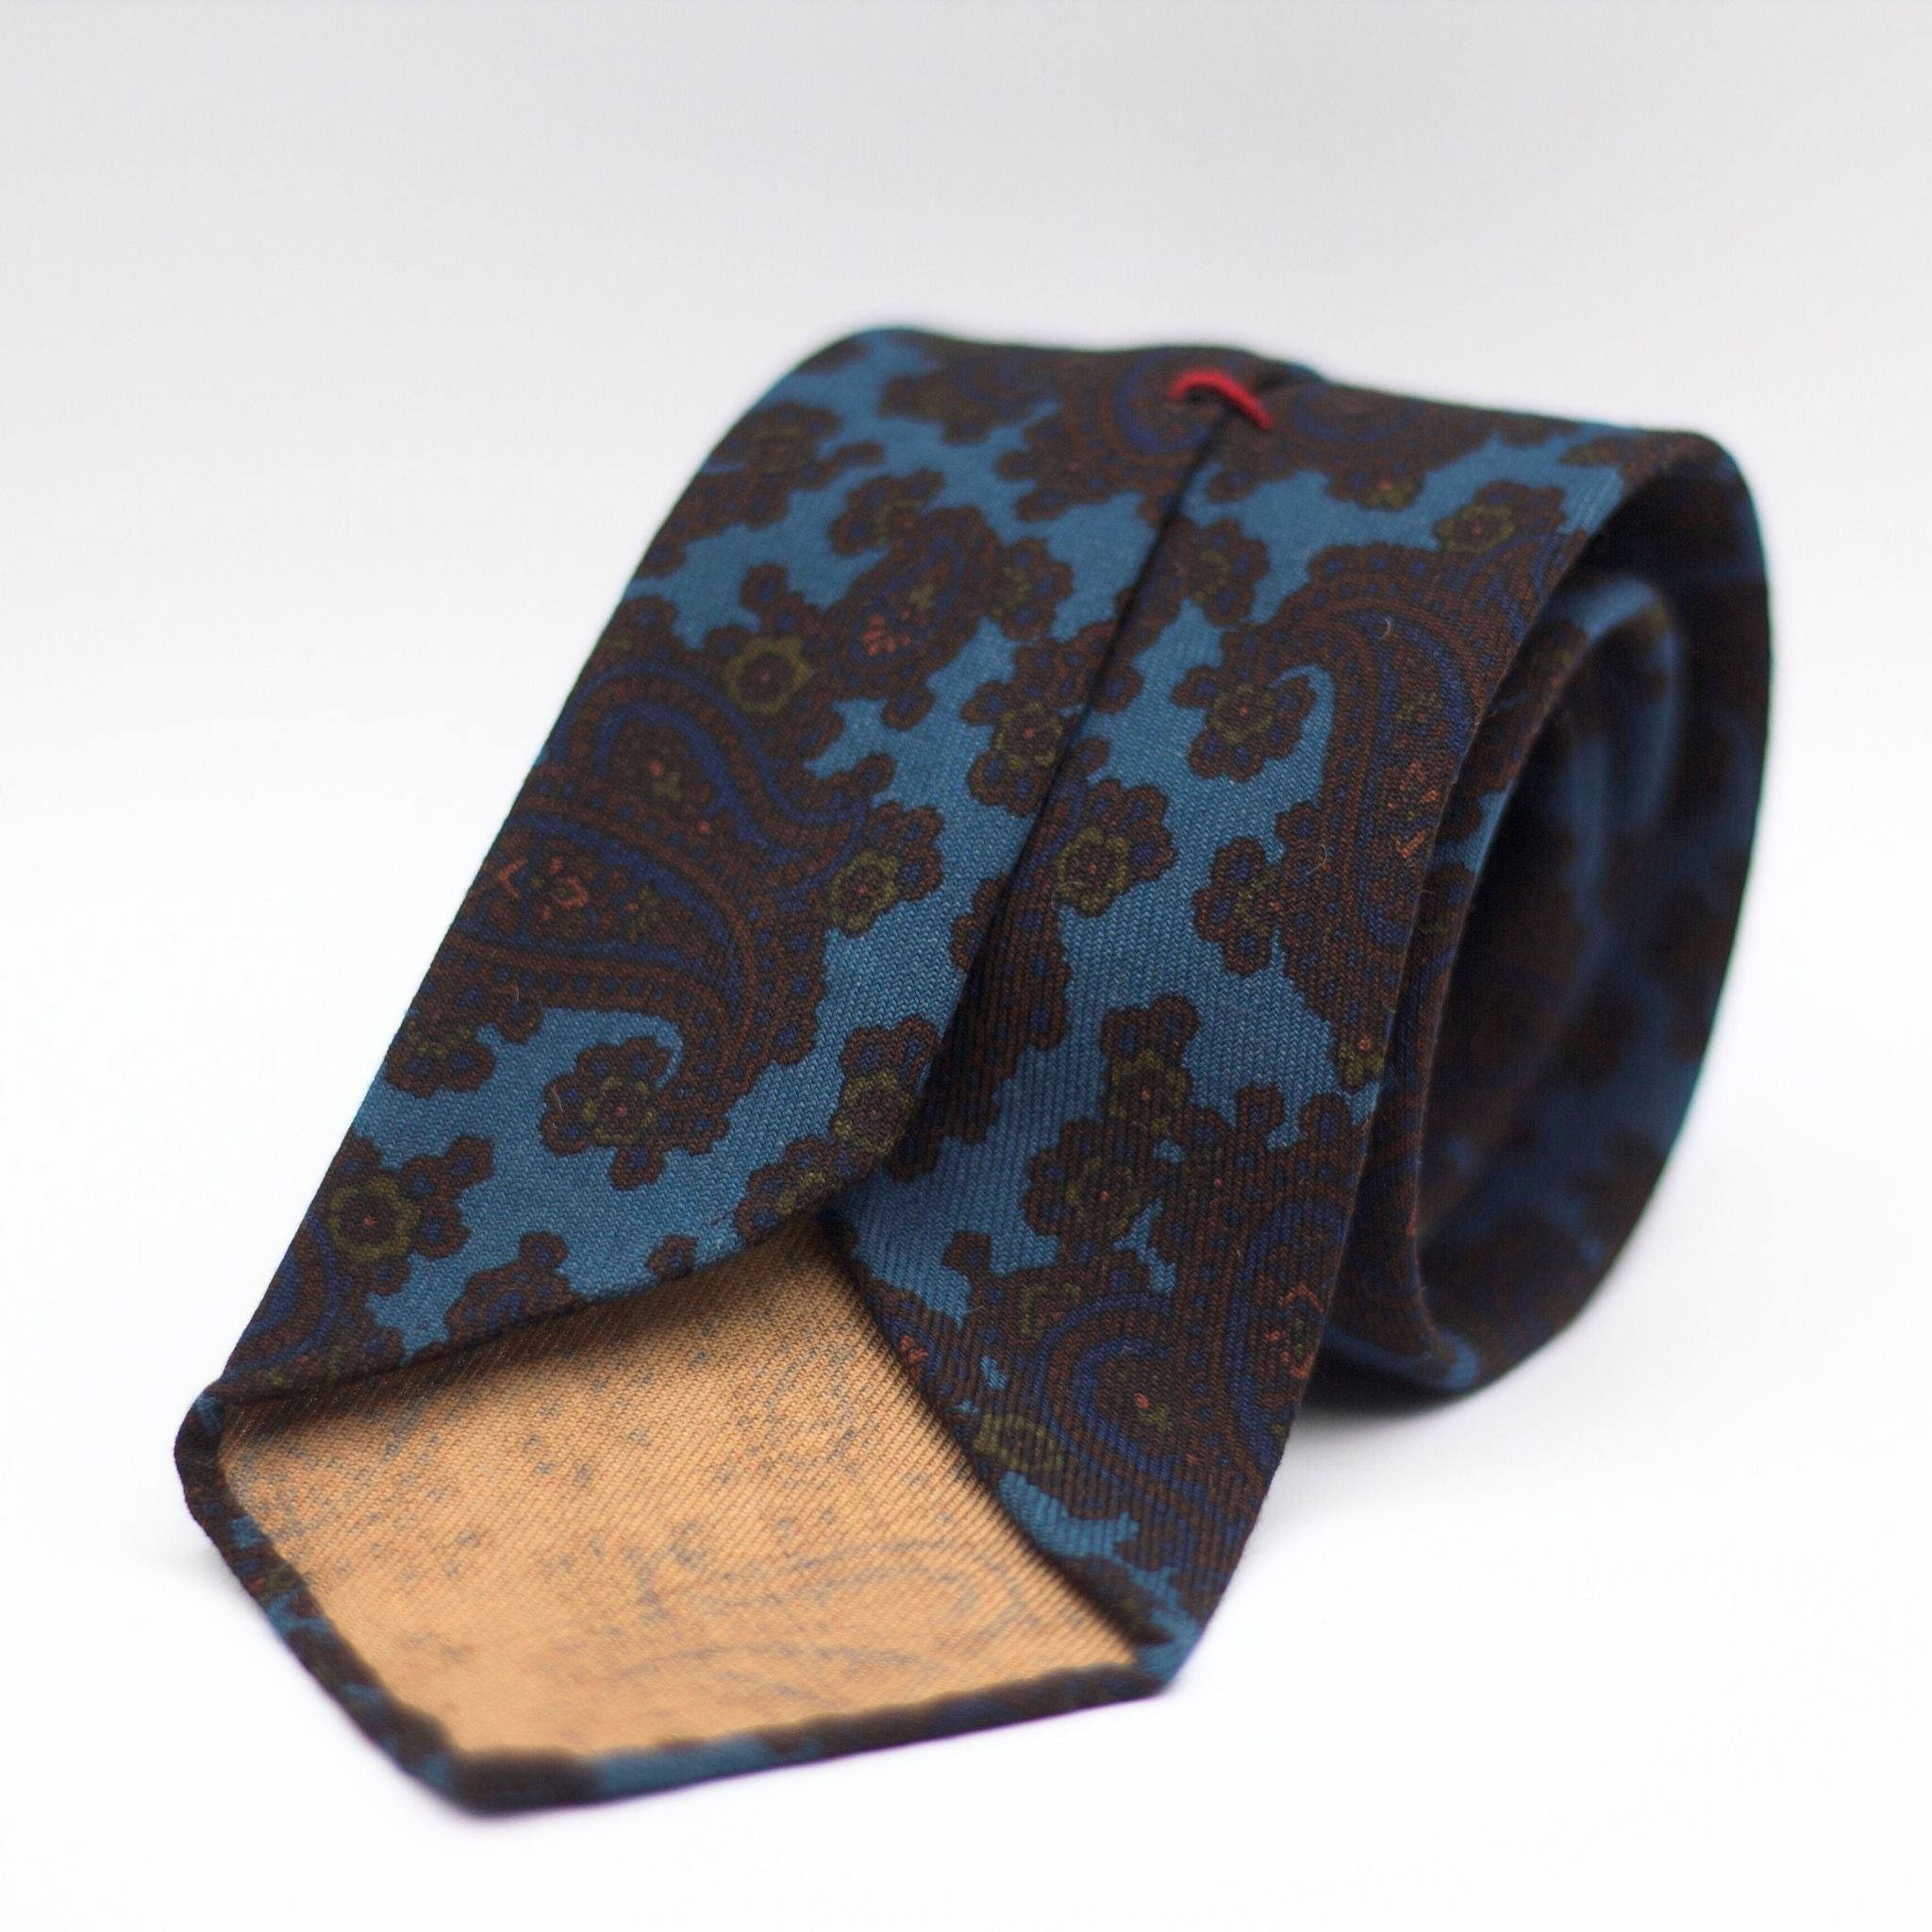 Cruciani & Bella 100%  Printed Wool  Unlined Hand rolled blades Light Blue, Brown, Green and Blue Paisley Motifs Tie Handmade in Italy 8 cm x 150 cm